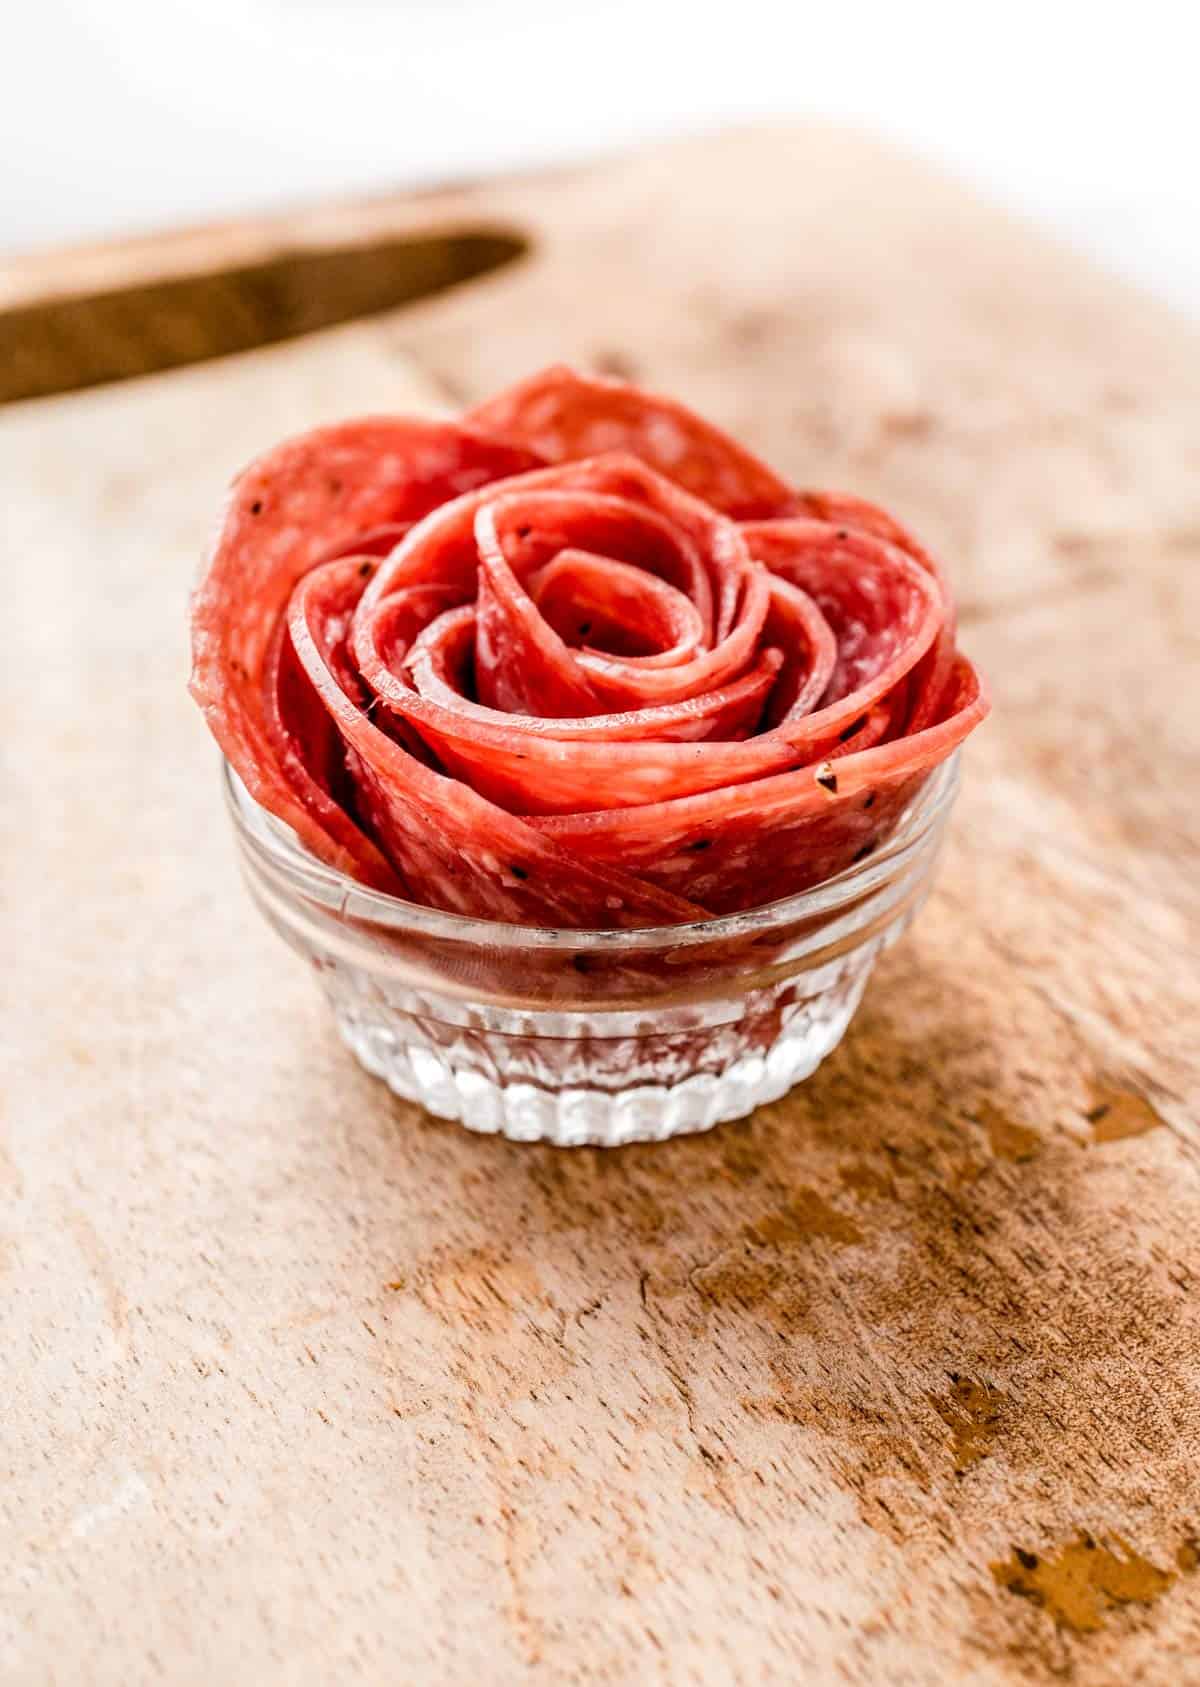 A salami rose on a wooden cutting board.